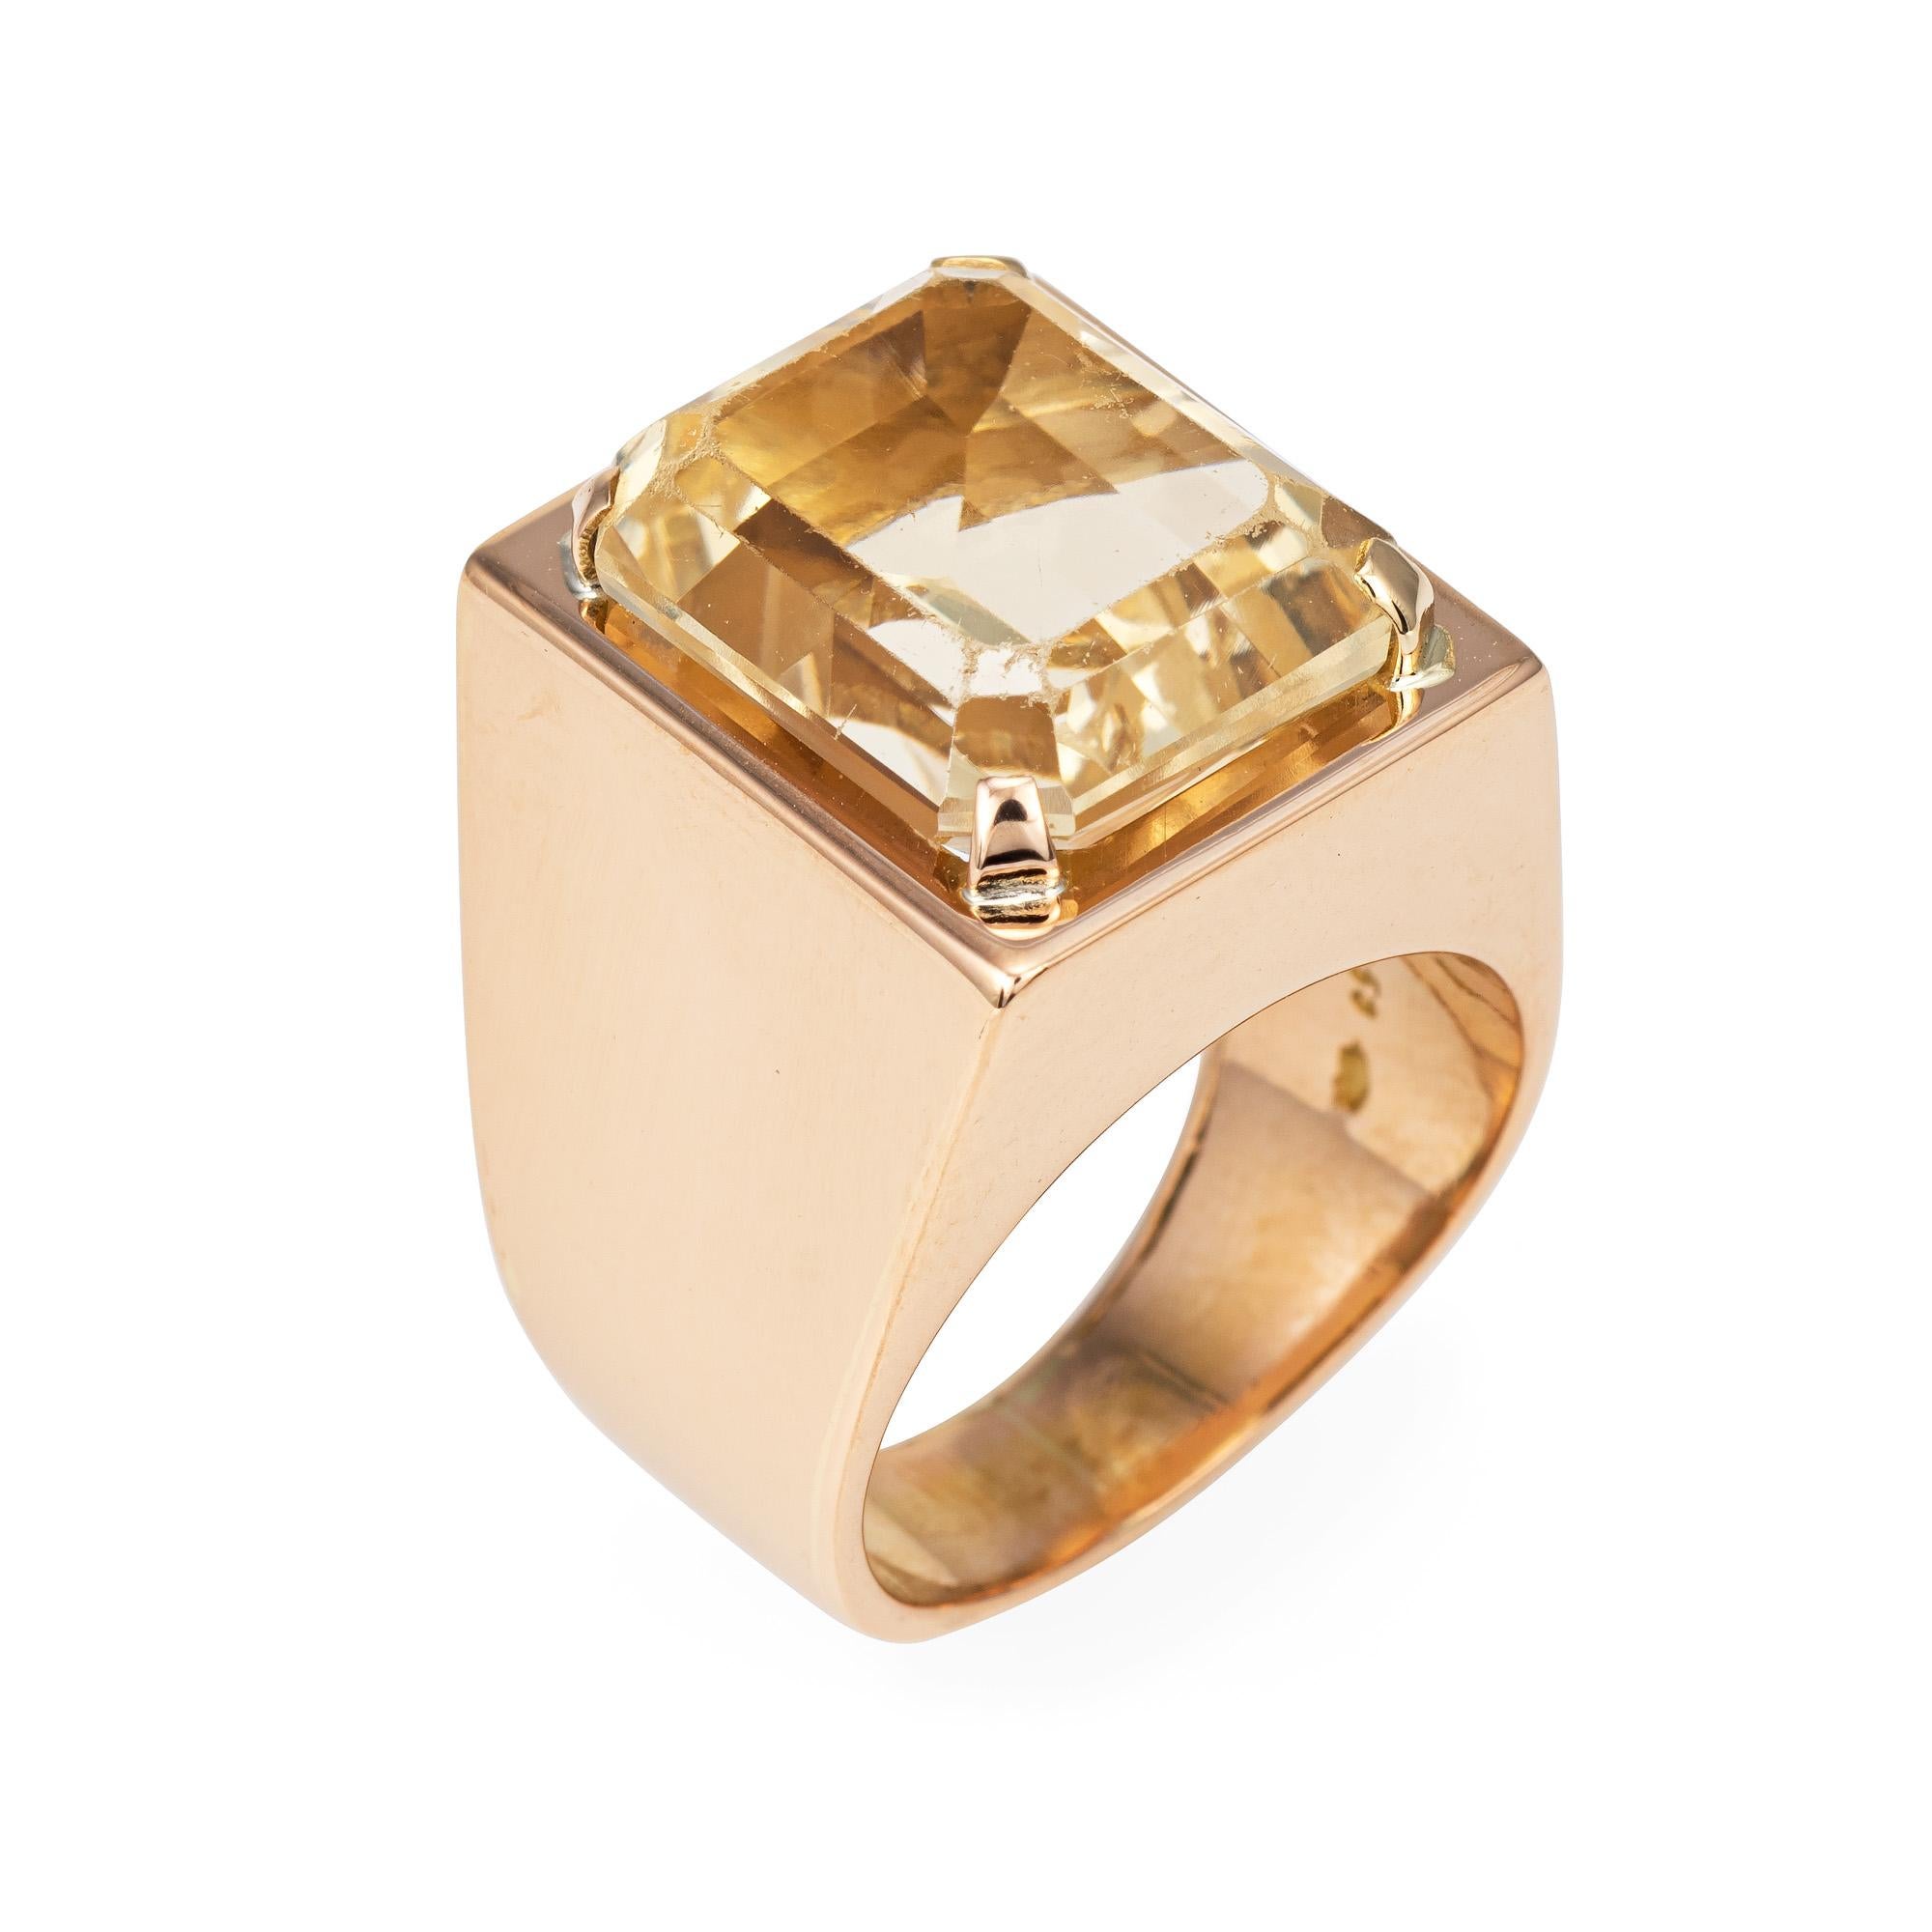 Stylish vintage yellow quartz ring (circa 1970s) crafted in 18 karat soft rose gold. 

Emerald cut yellow quartz measures 15mm x 12.5mm (estimated at 13 carats). The quartz shows some wear with surface abrasions visible under a 10x loupe. 

The